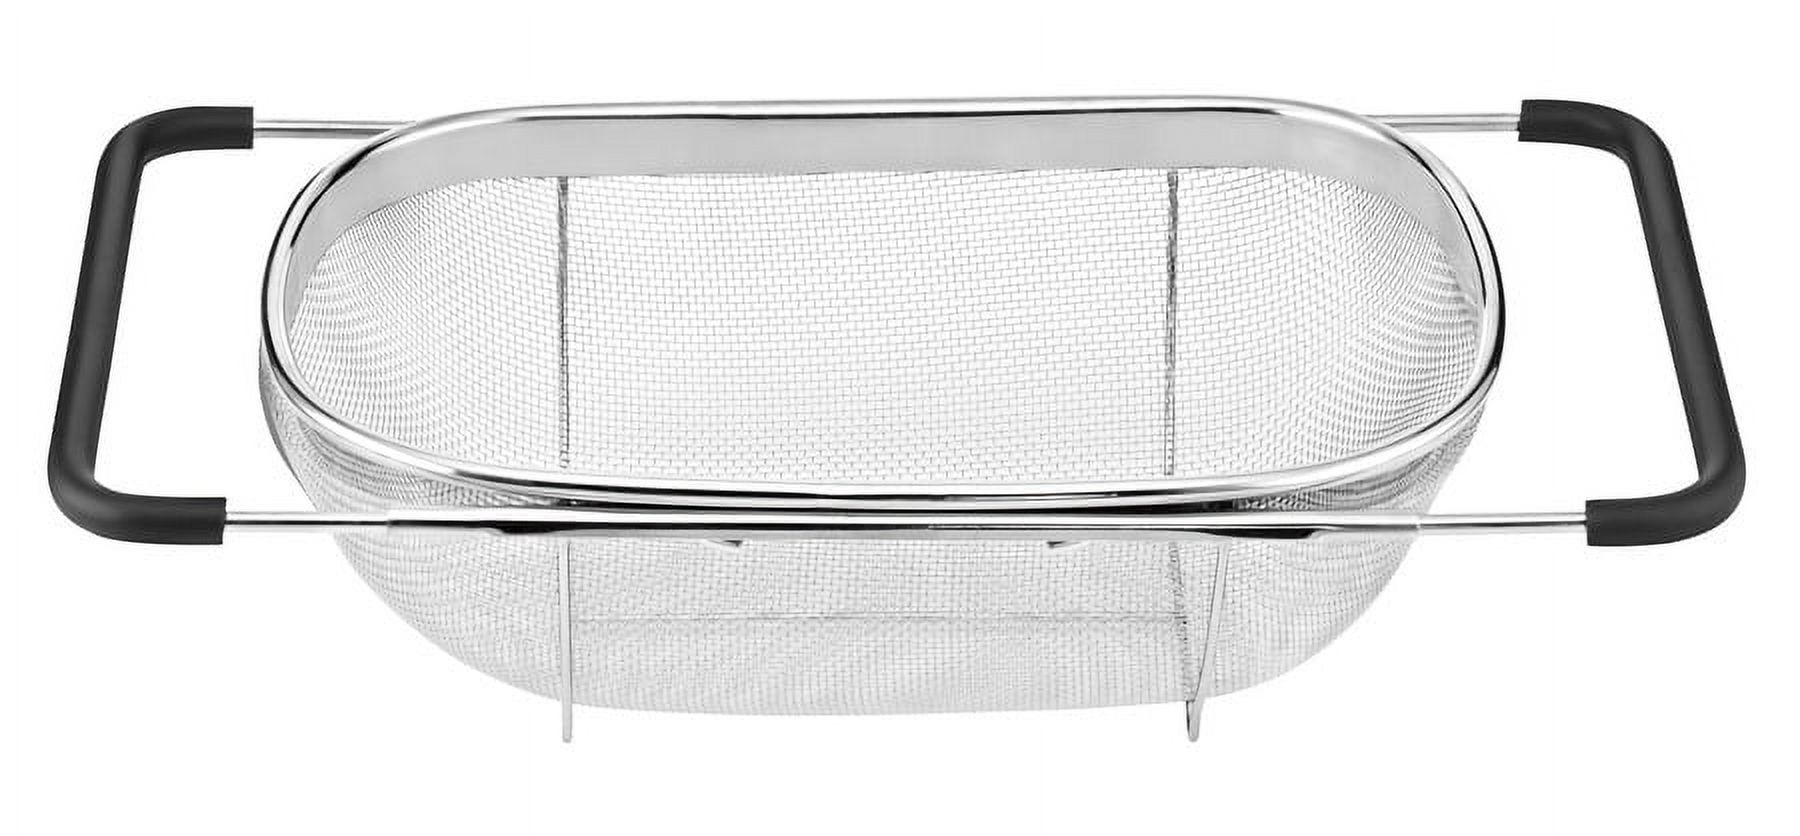 Cuisinart Non-Handled Over the Sink Colander - image 1 of 4